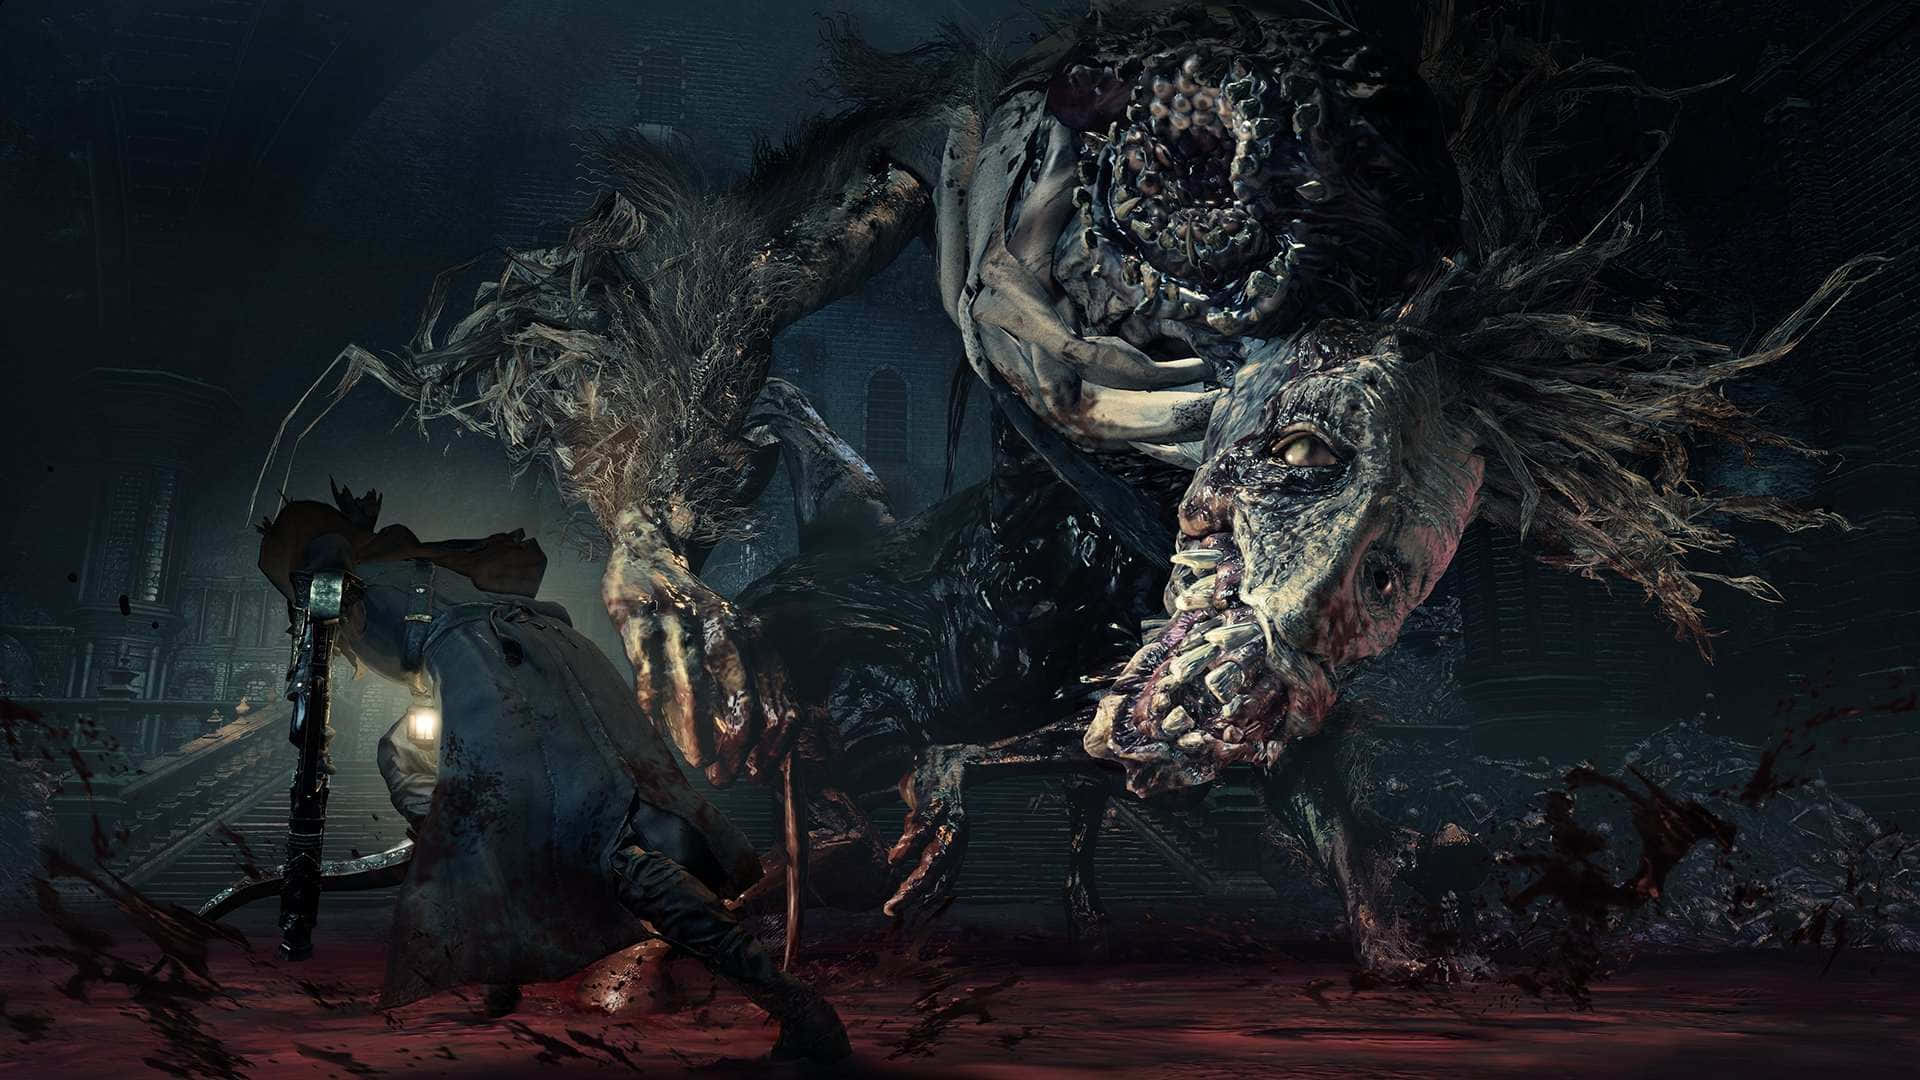 Hunter Fights the Beast in the Haunting World of Bloodborne